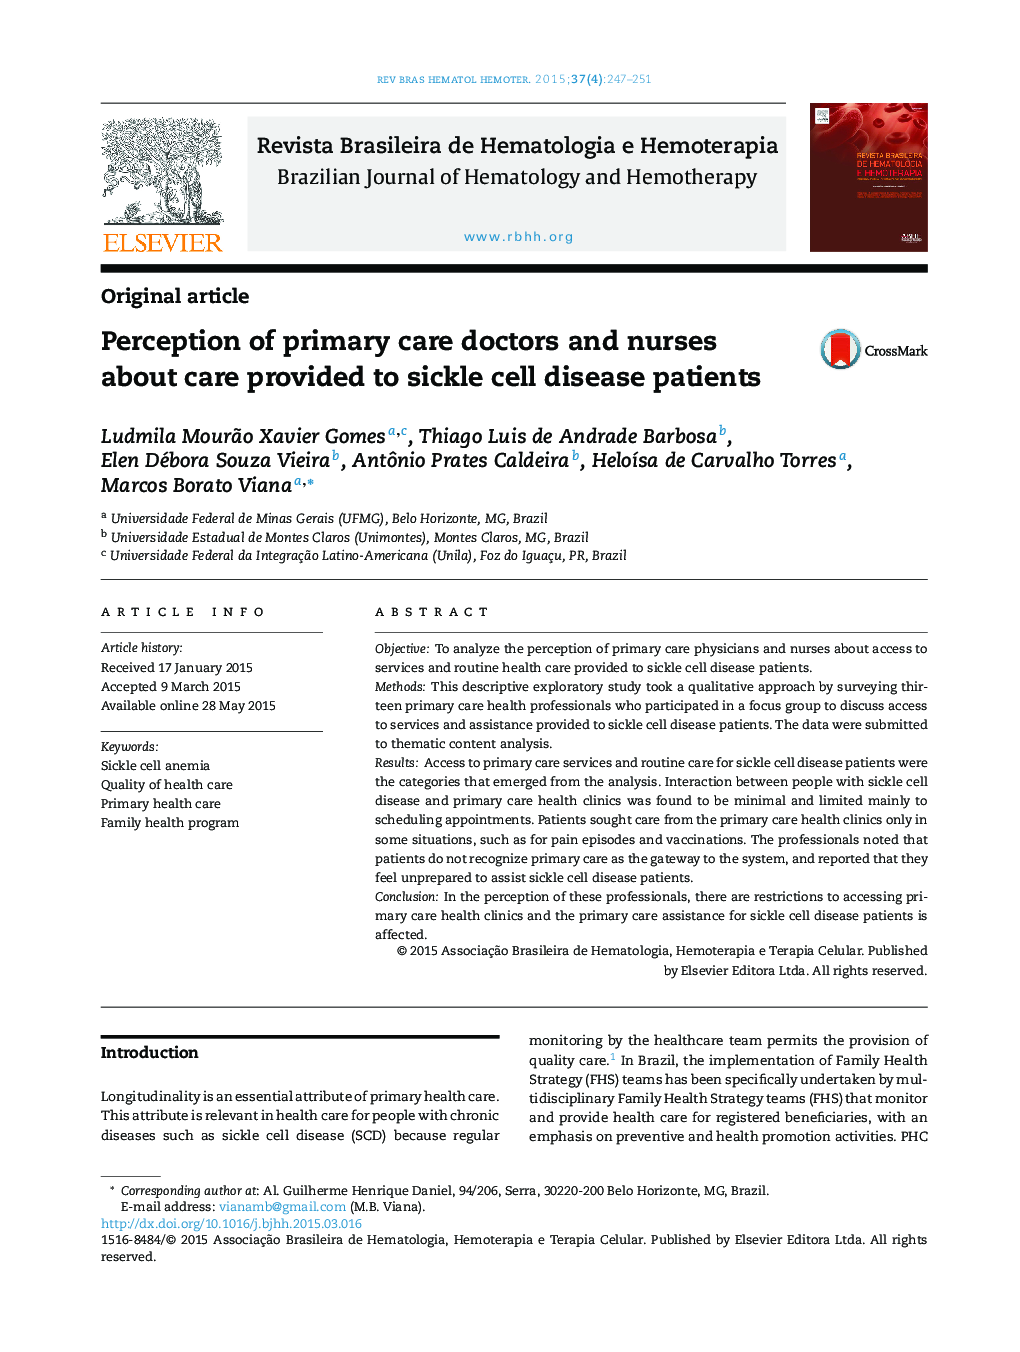 Perception of primary care doctors and nurses about care provided to sickle cell disease patients